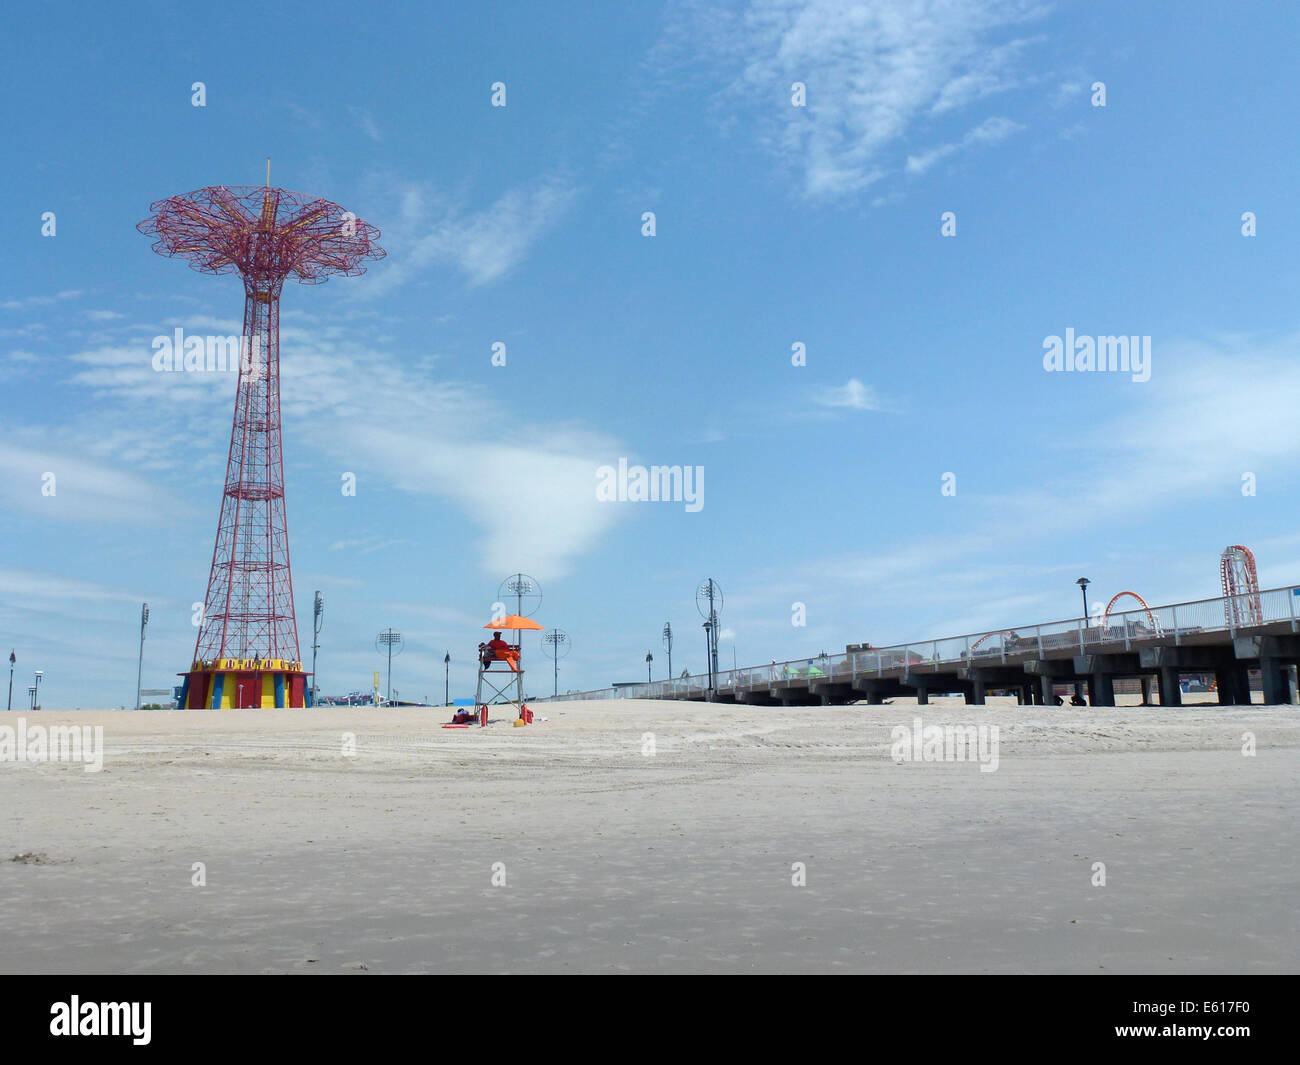 The Parachute Jump (L) and other fairground rides stand at the promenade of Brighton Beach on Coney Island, New York, USA, 24 June 2014. The Parachute Jump is an 80 meters high red steel tower weighing 150 tons. Originally it was part of the New York World Exhibition 1939 in the Flushing Meadows Park and was brought here by the operators of the Steeplechase Park wher it was used until 1968. Since July 1977 the tower is one of the city's landmarks and is under monumental protection since 1989. Photo: Alexandra Schuler - ATTENTION! NO WIRE SERVICE - Stock Photo